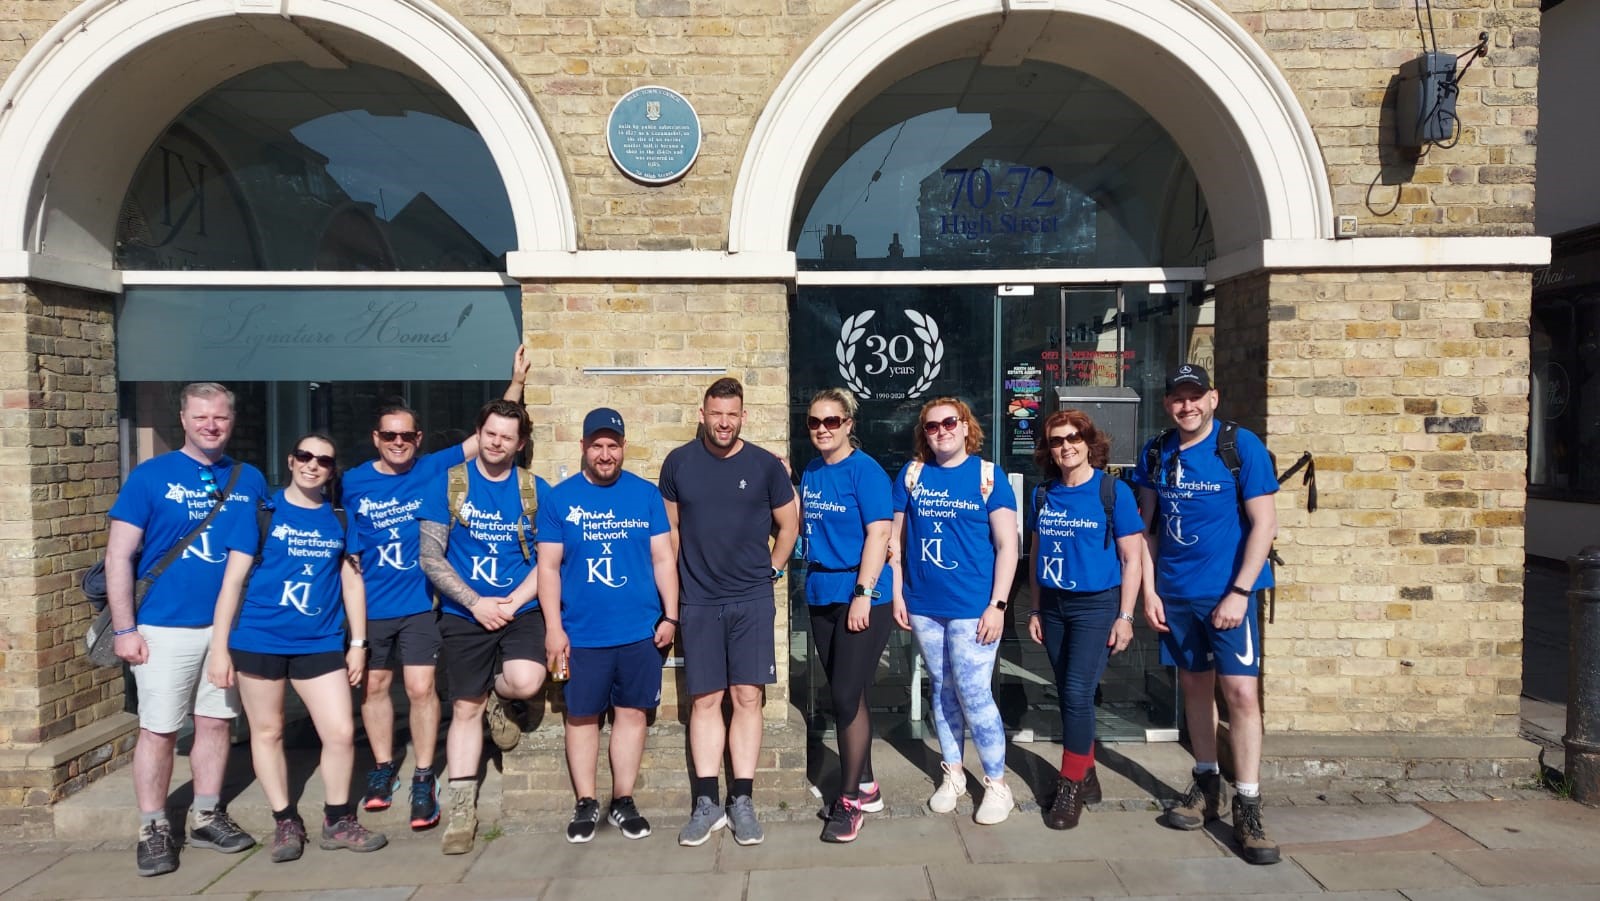 Local estate agents Keith Ian walk miles for Herts Mind Network!